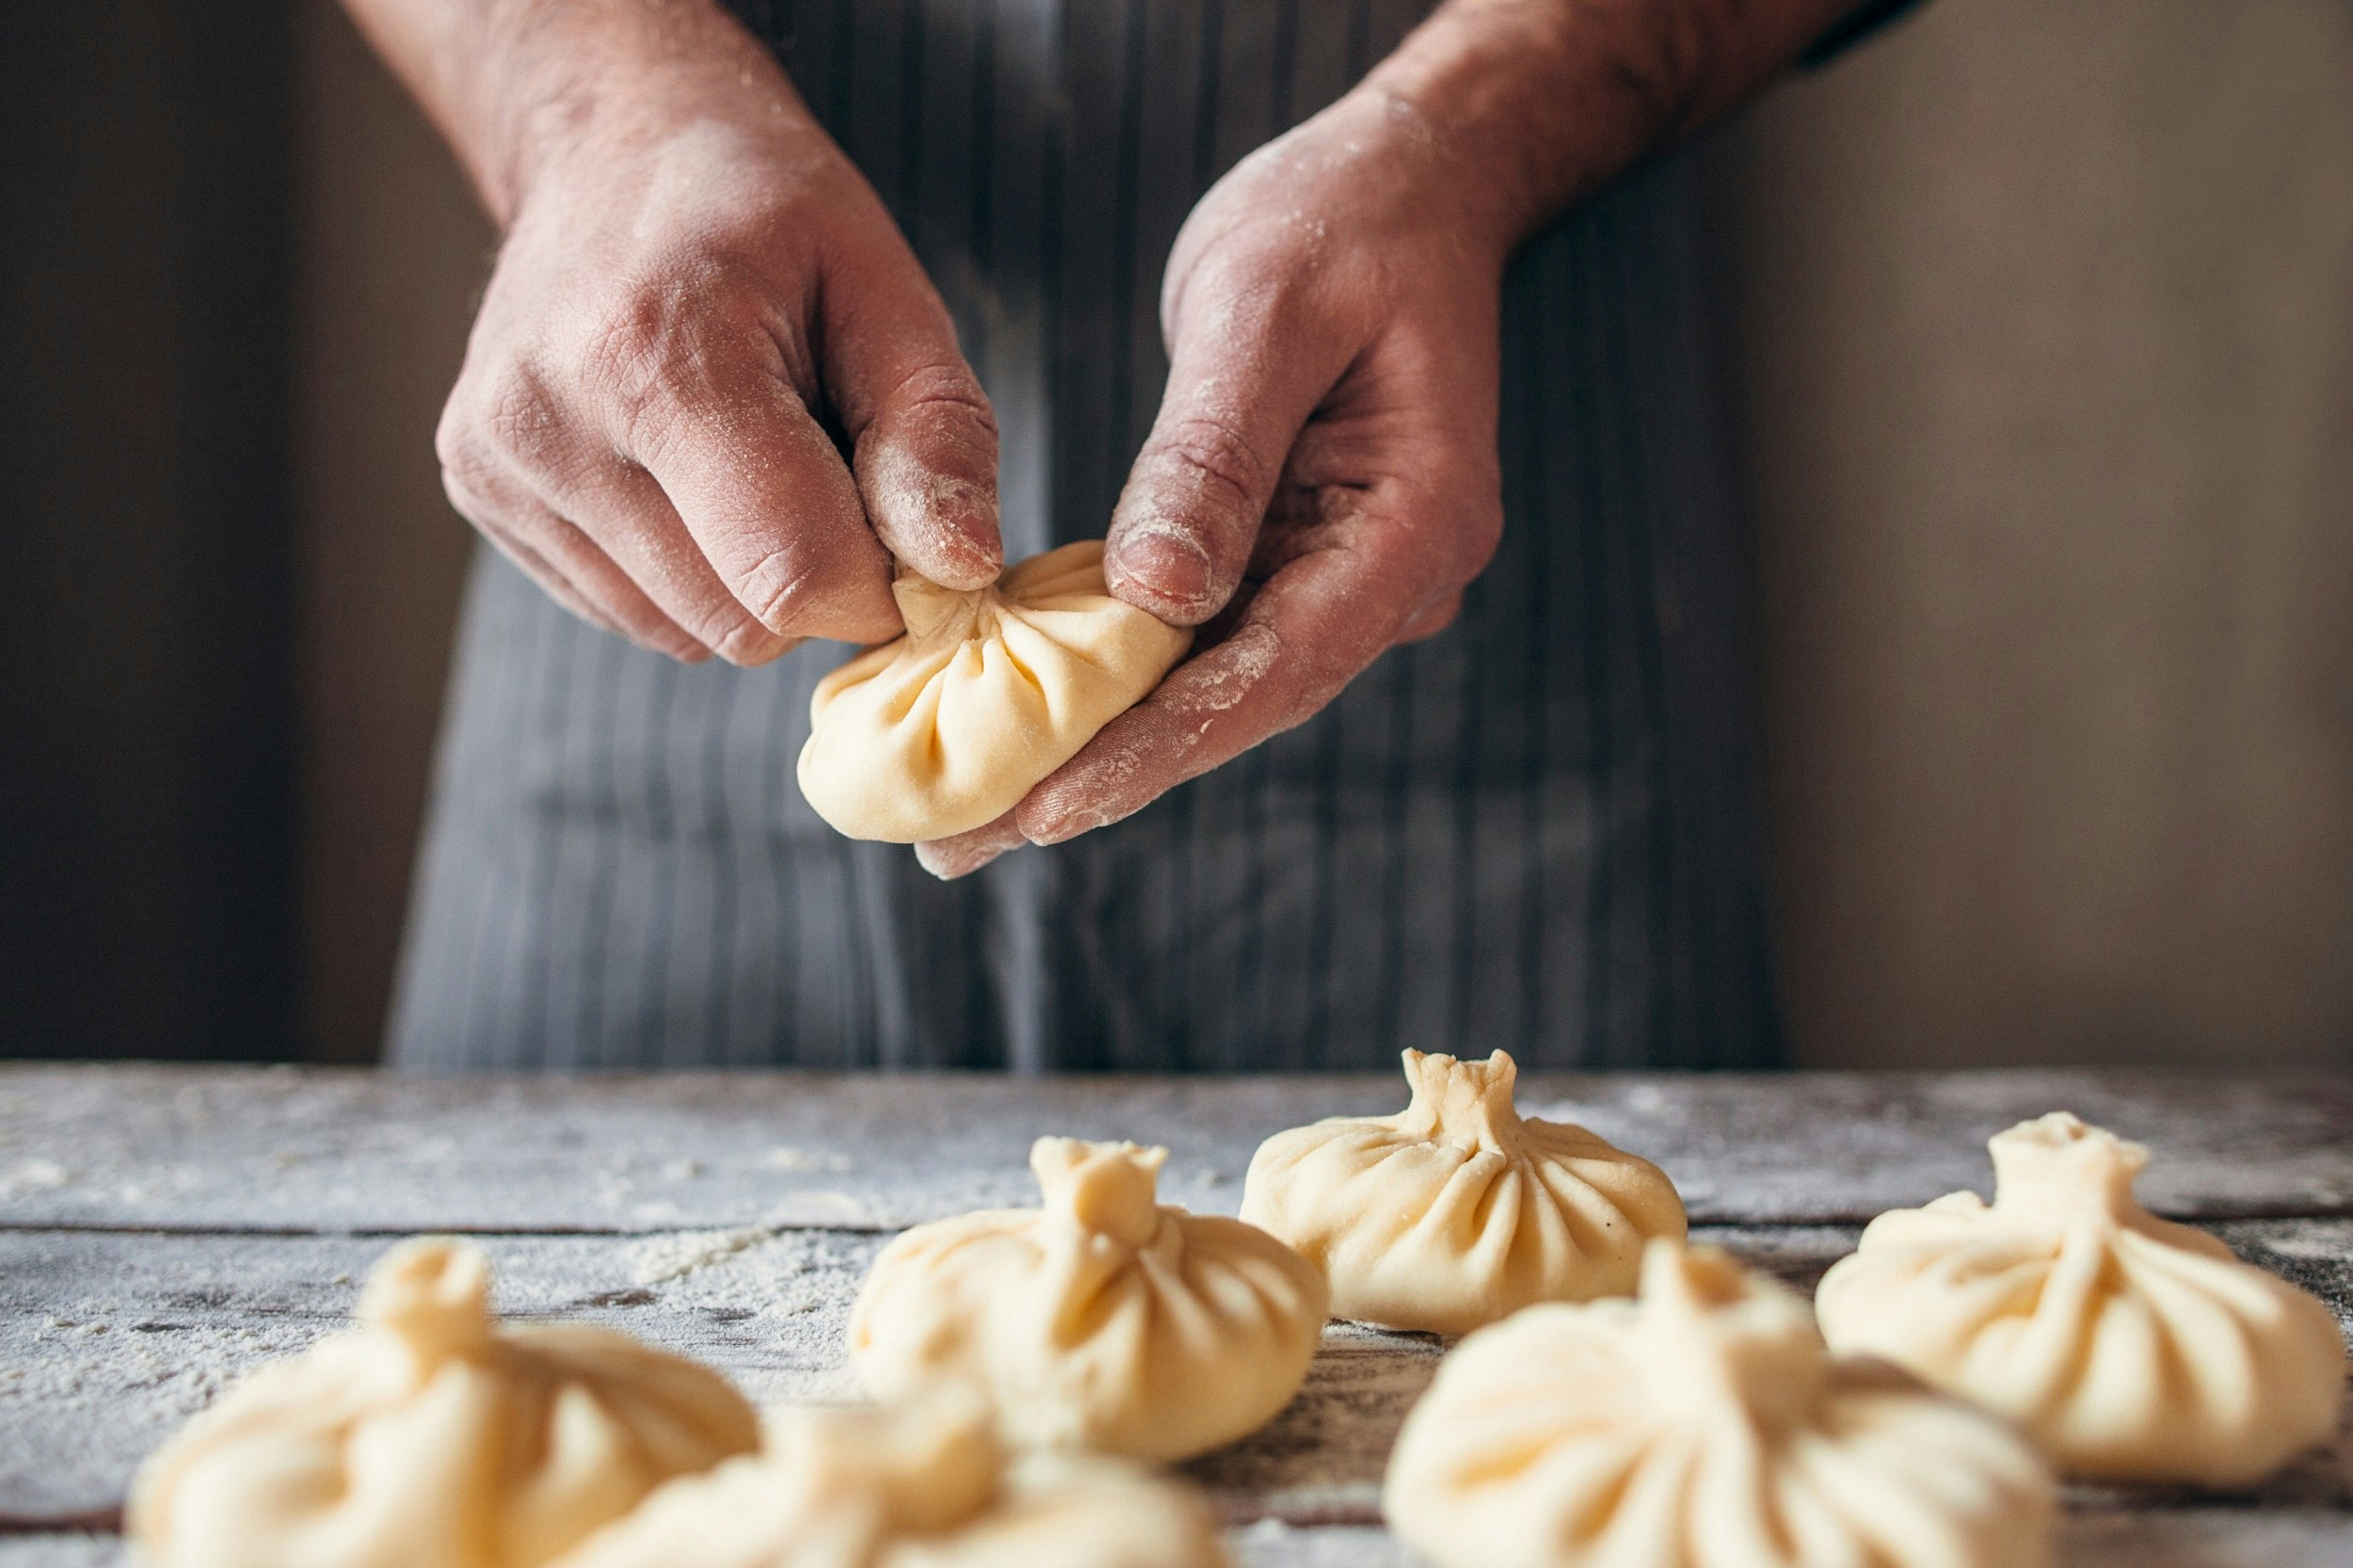 Someone preparing pale dumplings, small parcels of dough pinched together at the top, their hands covered in flour